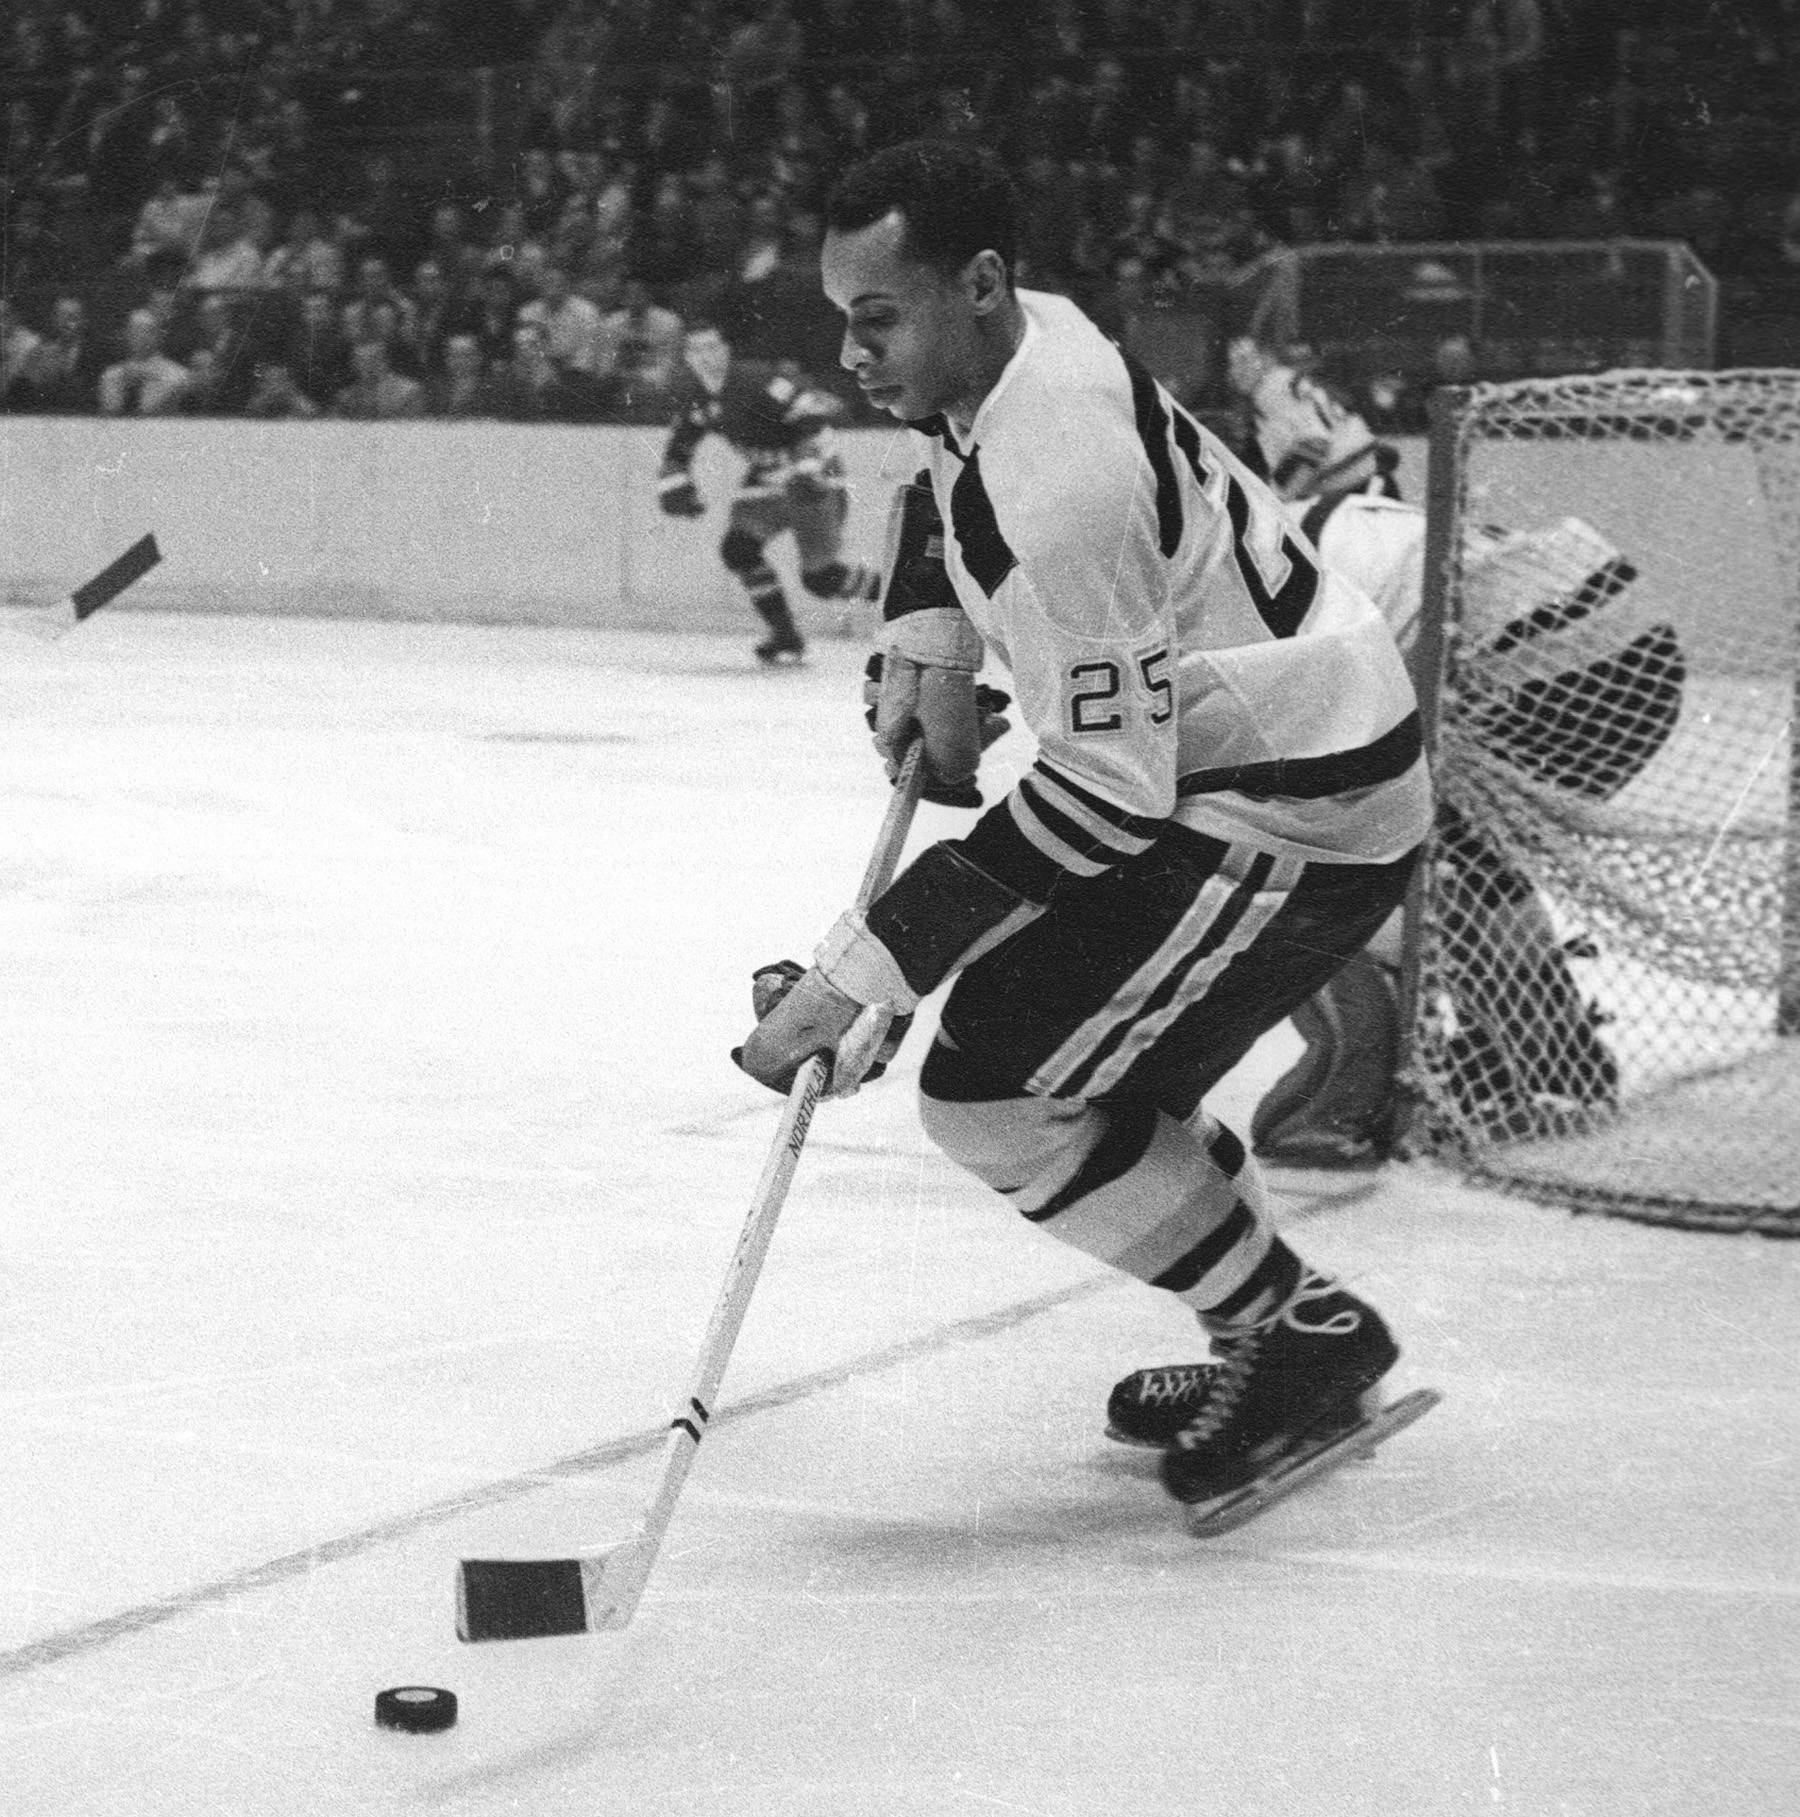 Willie O’Ree - Willie O’Ree broke the color barrier on the ice when he was hired by the Quebec Aces, a minor-league team affiliated with the Boston Bruins, in 1956.&nbsp;(Photo:&nbsp; Bruce Bennett Studios/Getty Images)